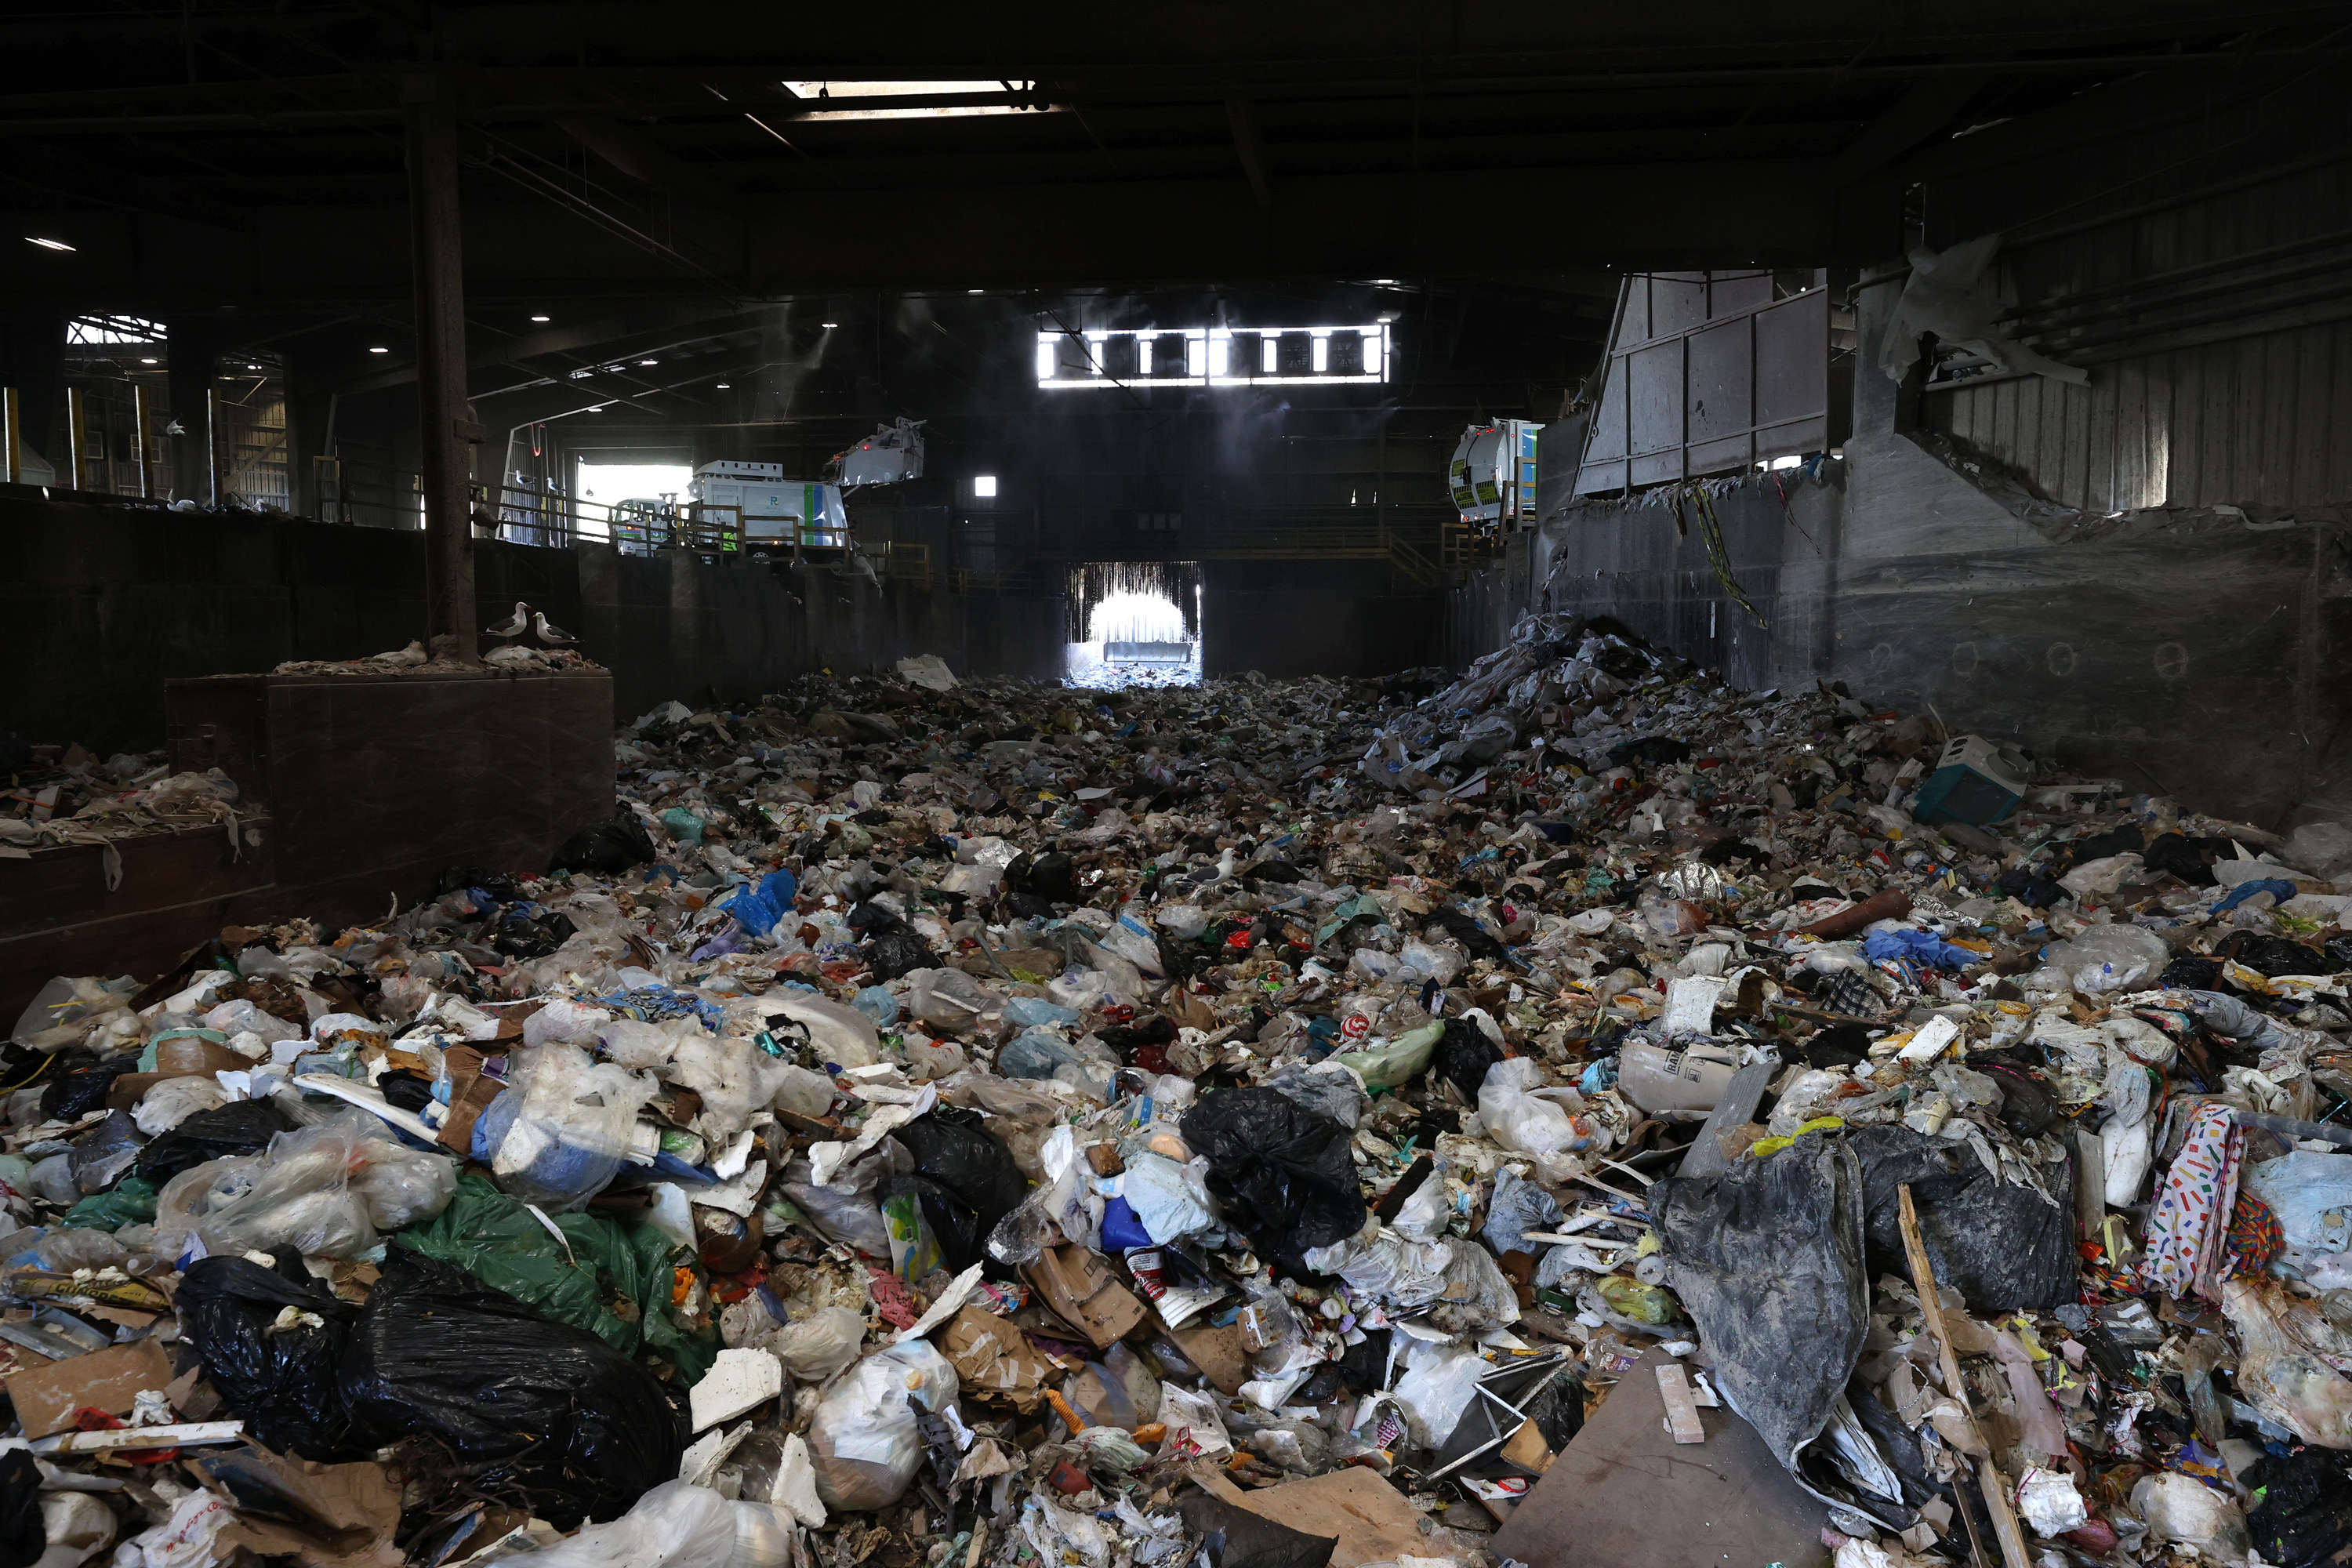 Inside a warehouse trash is seen piled up filling the space